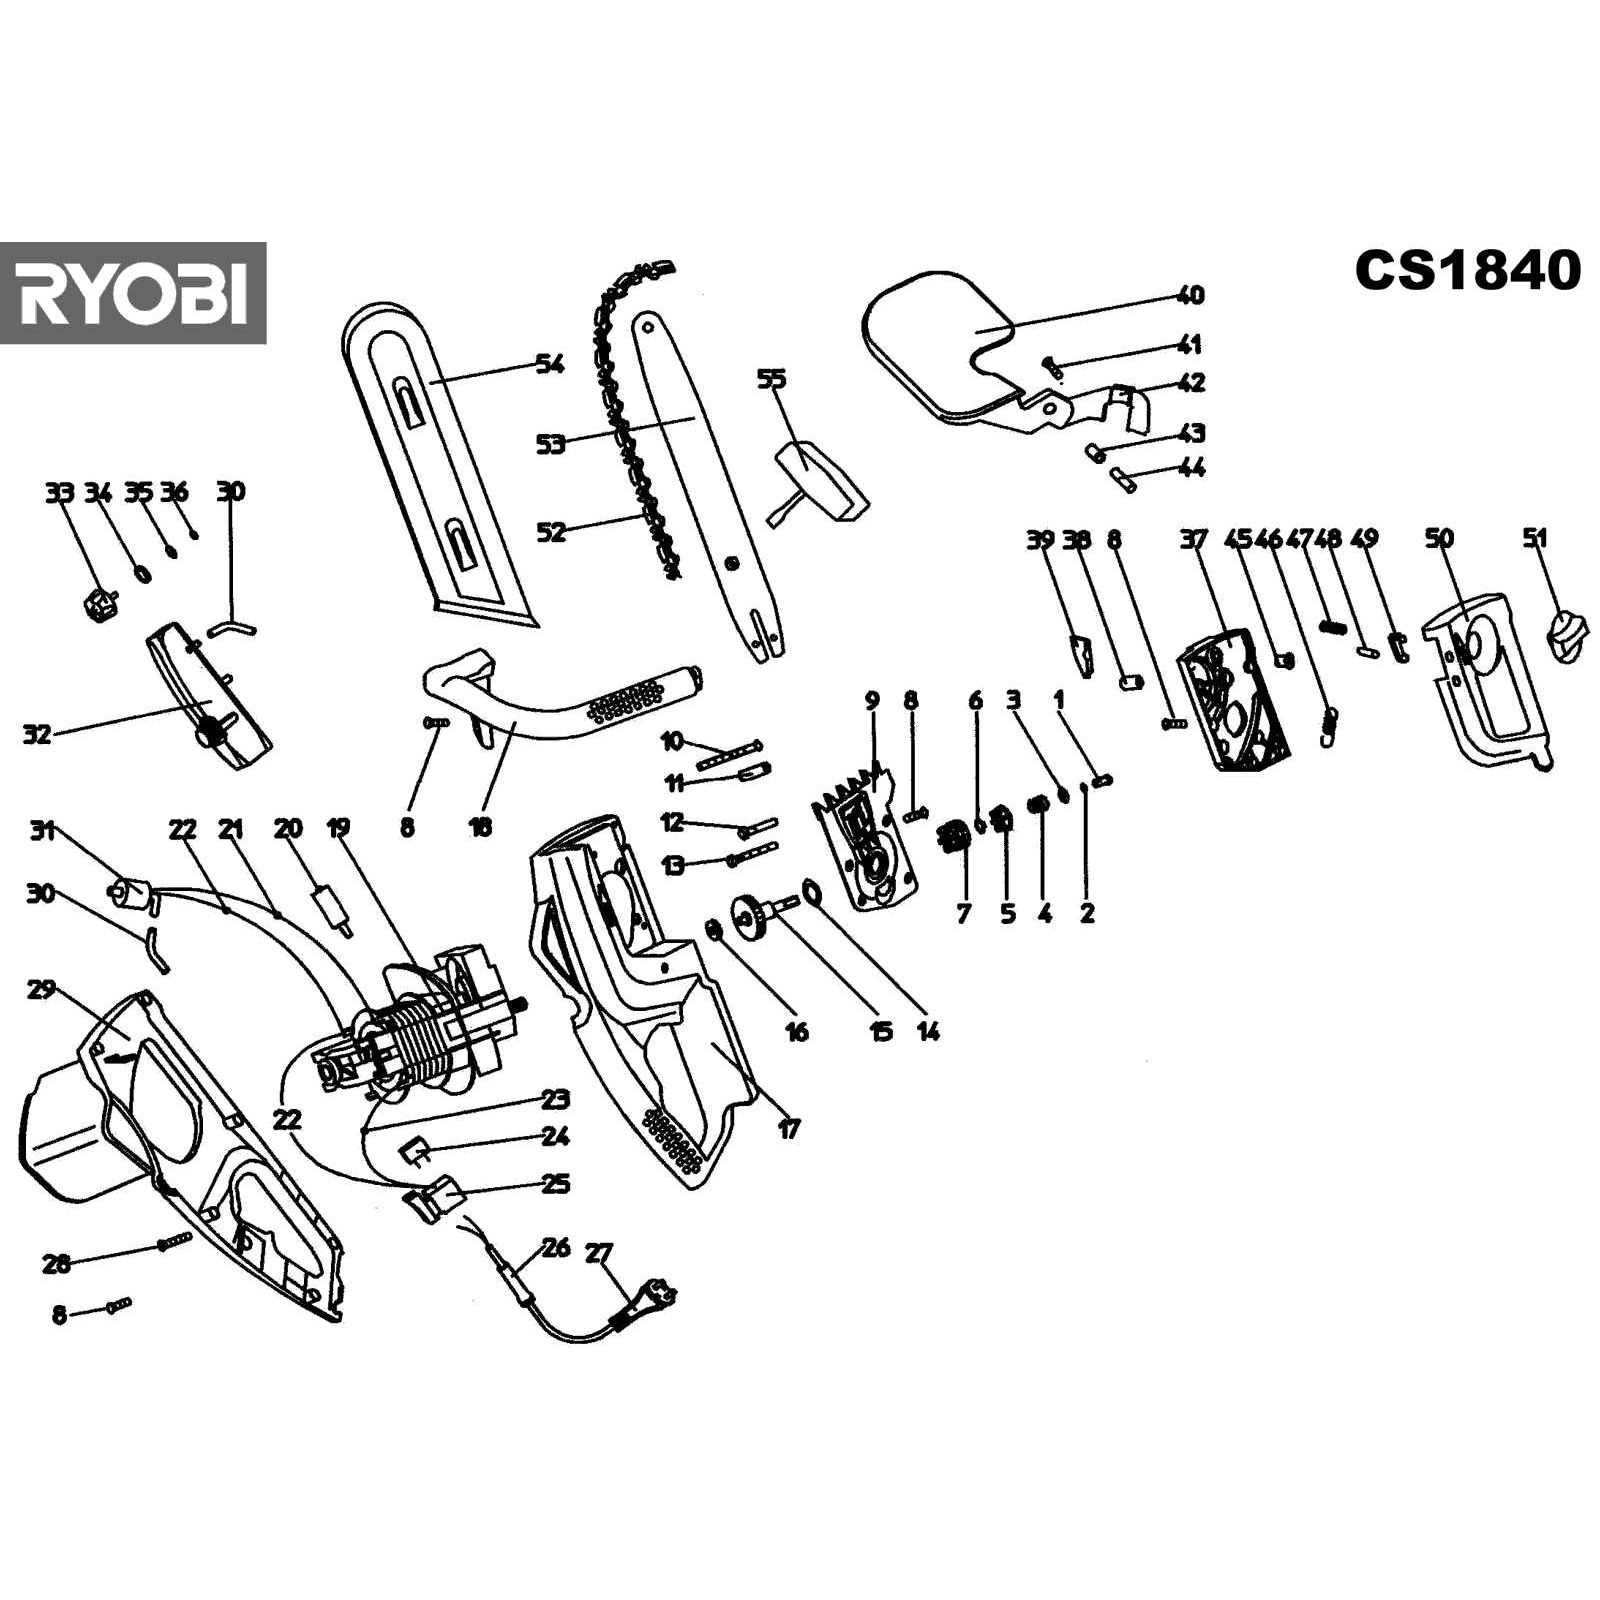 Buy A Ryobi Cs1840 Spare Part Or Replacement Part For Your Electric